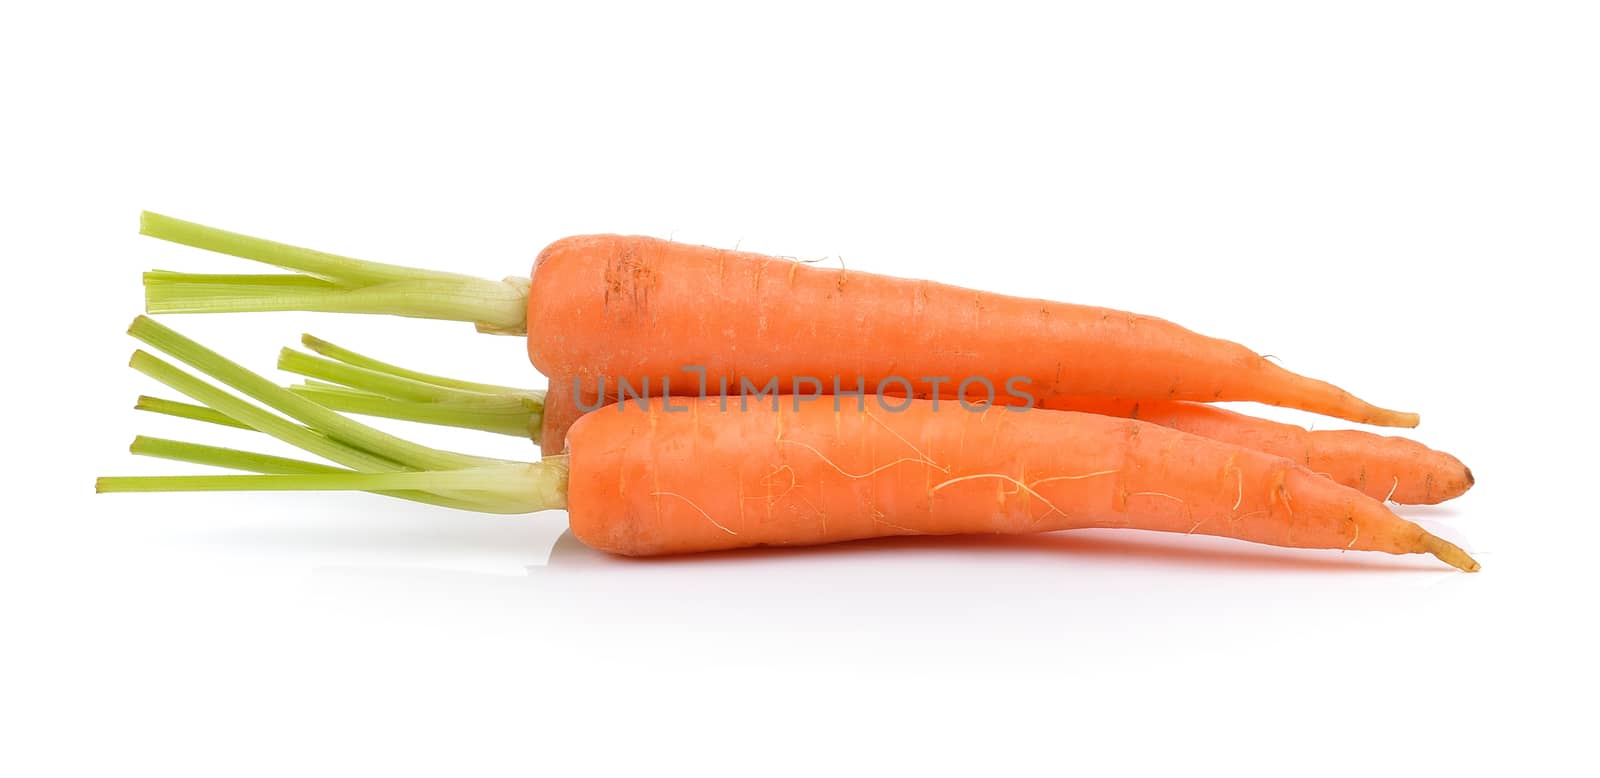  baby carrots isolated on a  white background by sommai